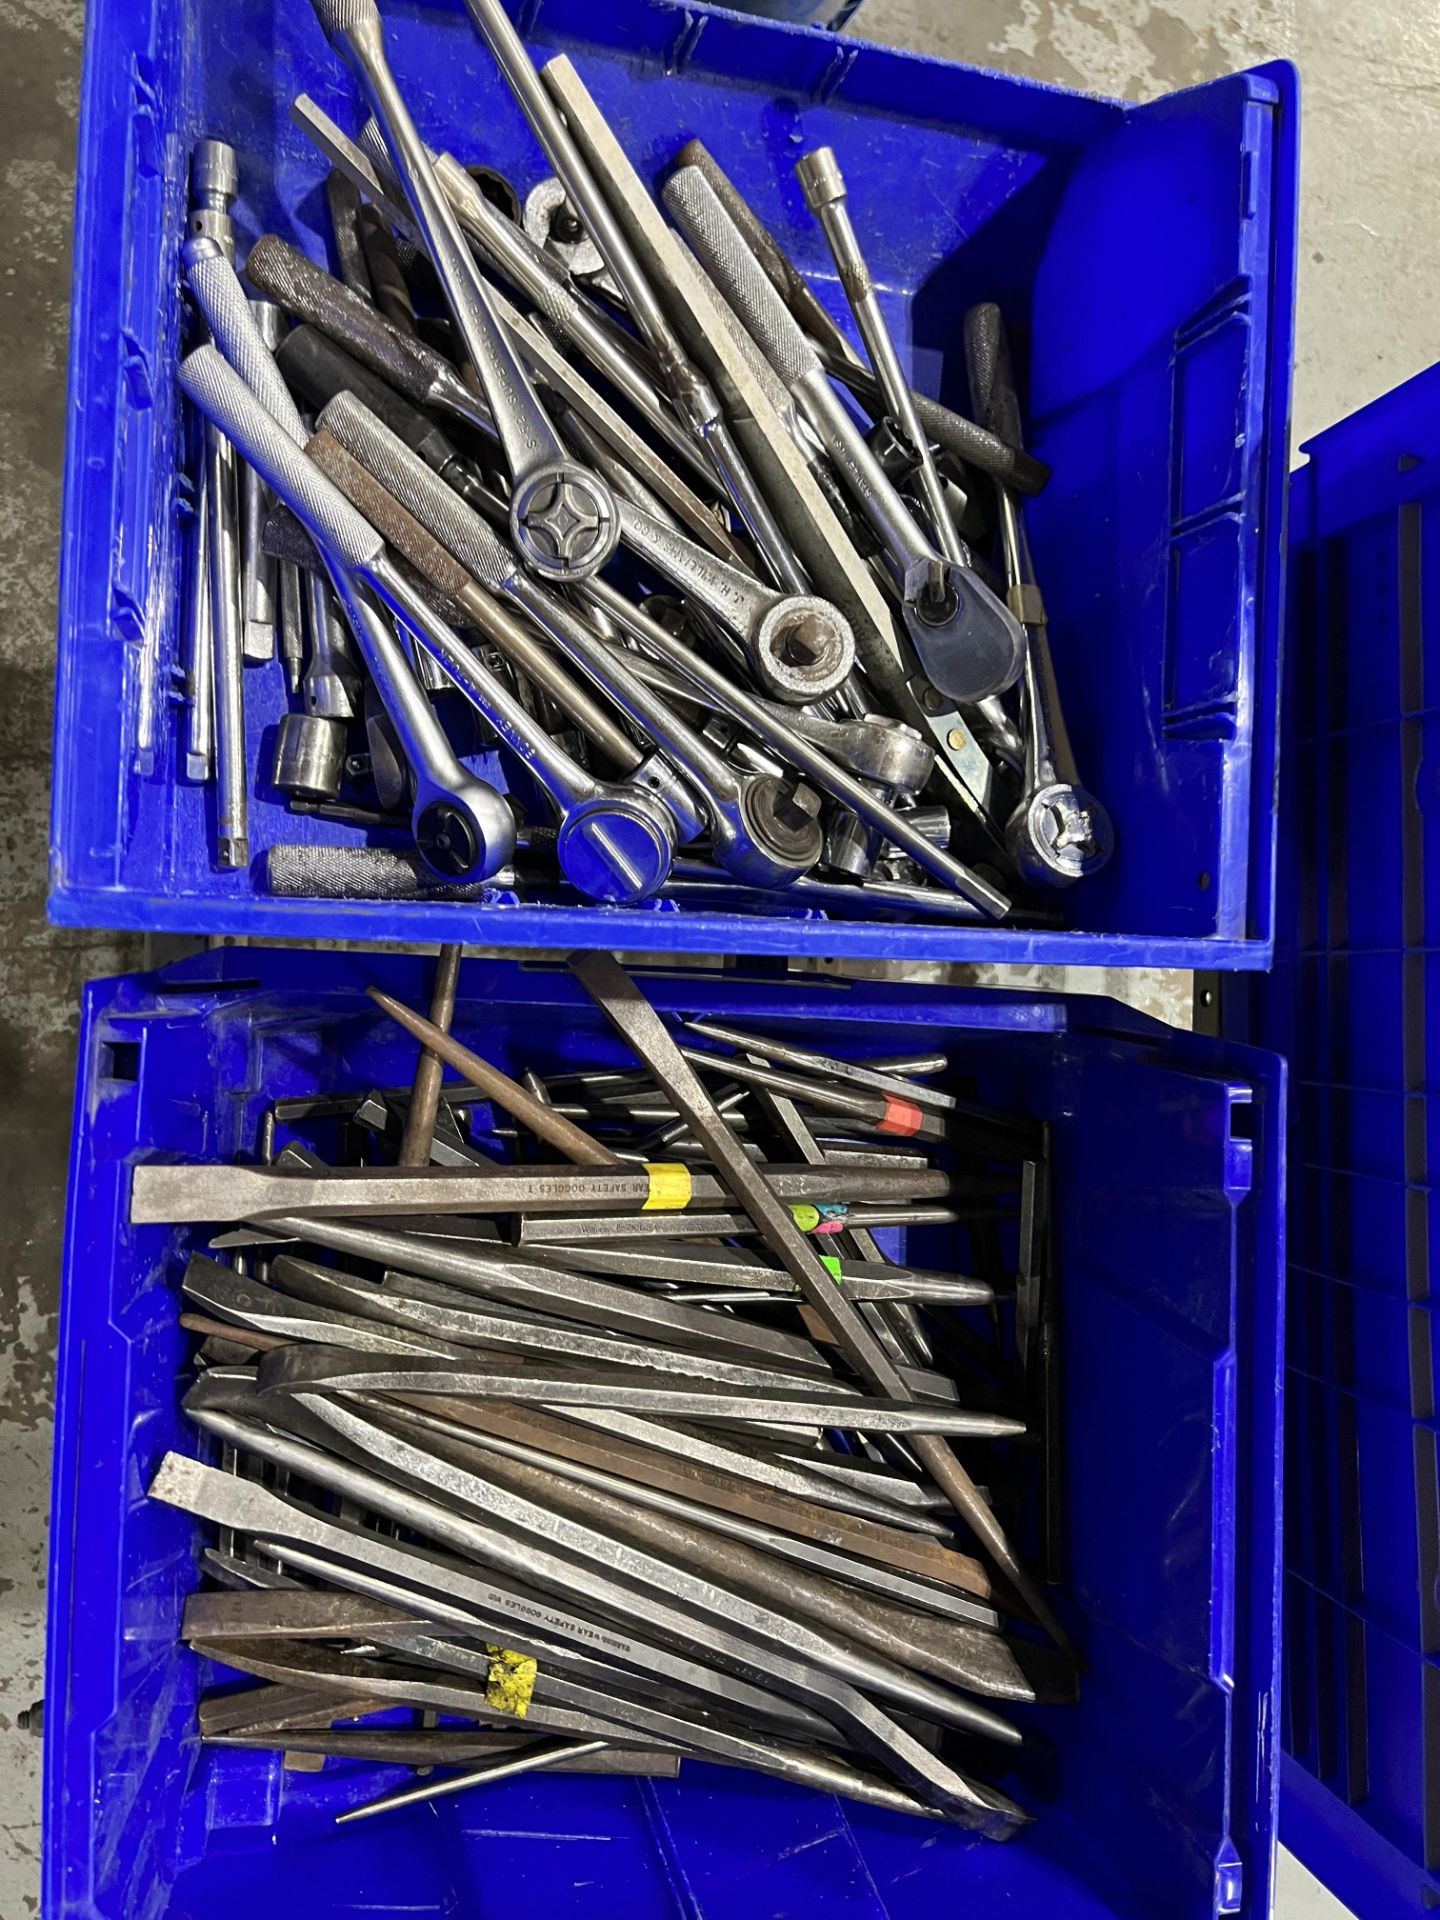 CART AND CONTENTS: VARIOUS RATCHETS; CHISELS; WRENCHES - Image 2 of 2